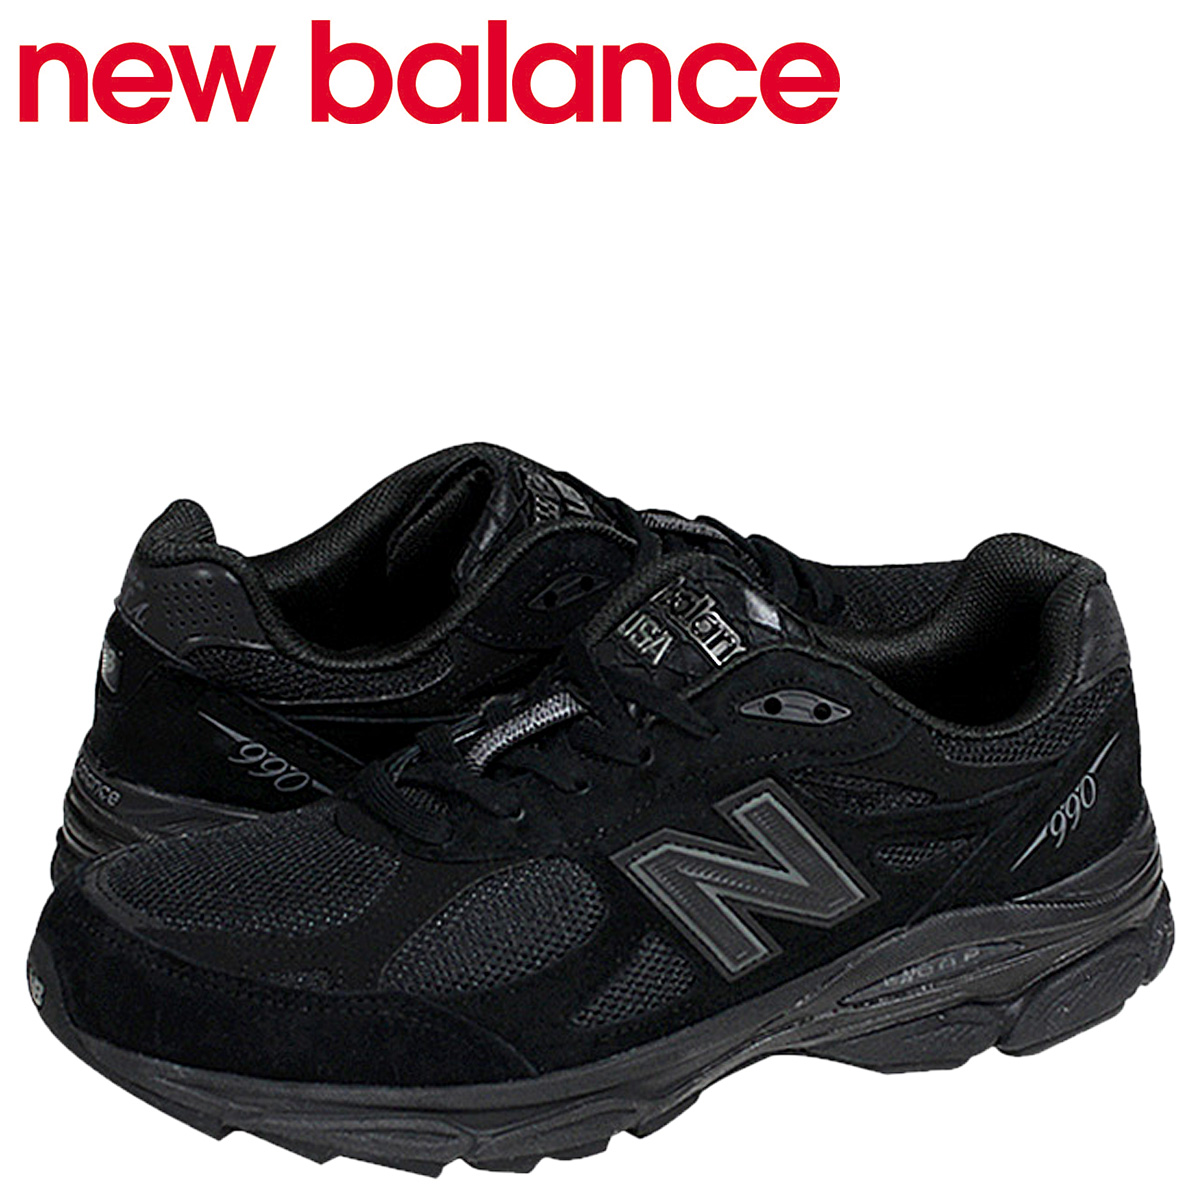 Allsports New Balance New Balance M990tb3 Sneakers D Wise Suede